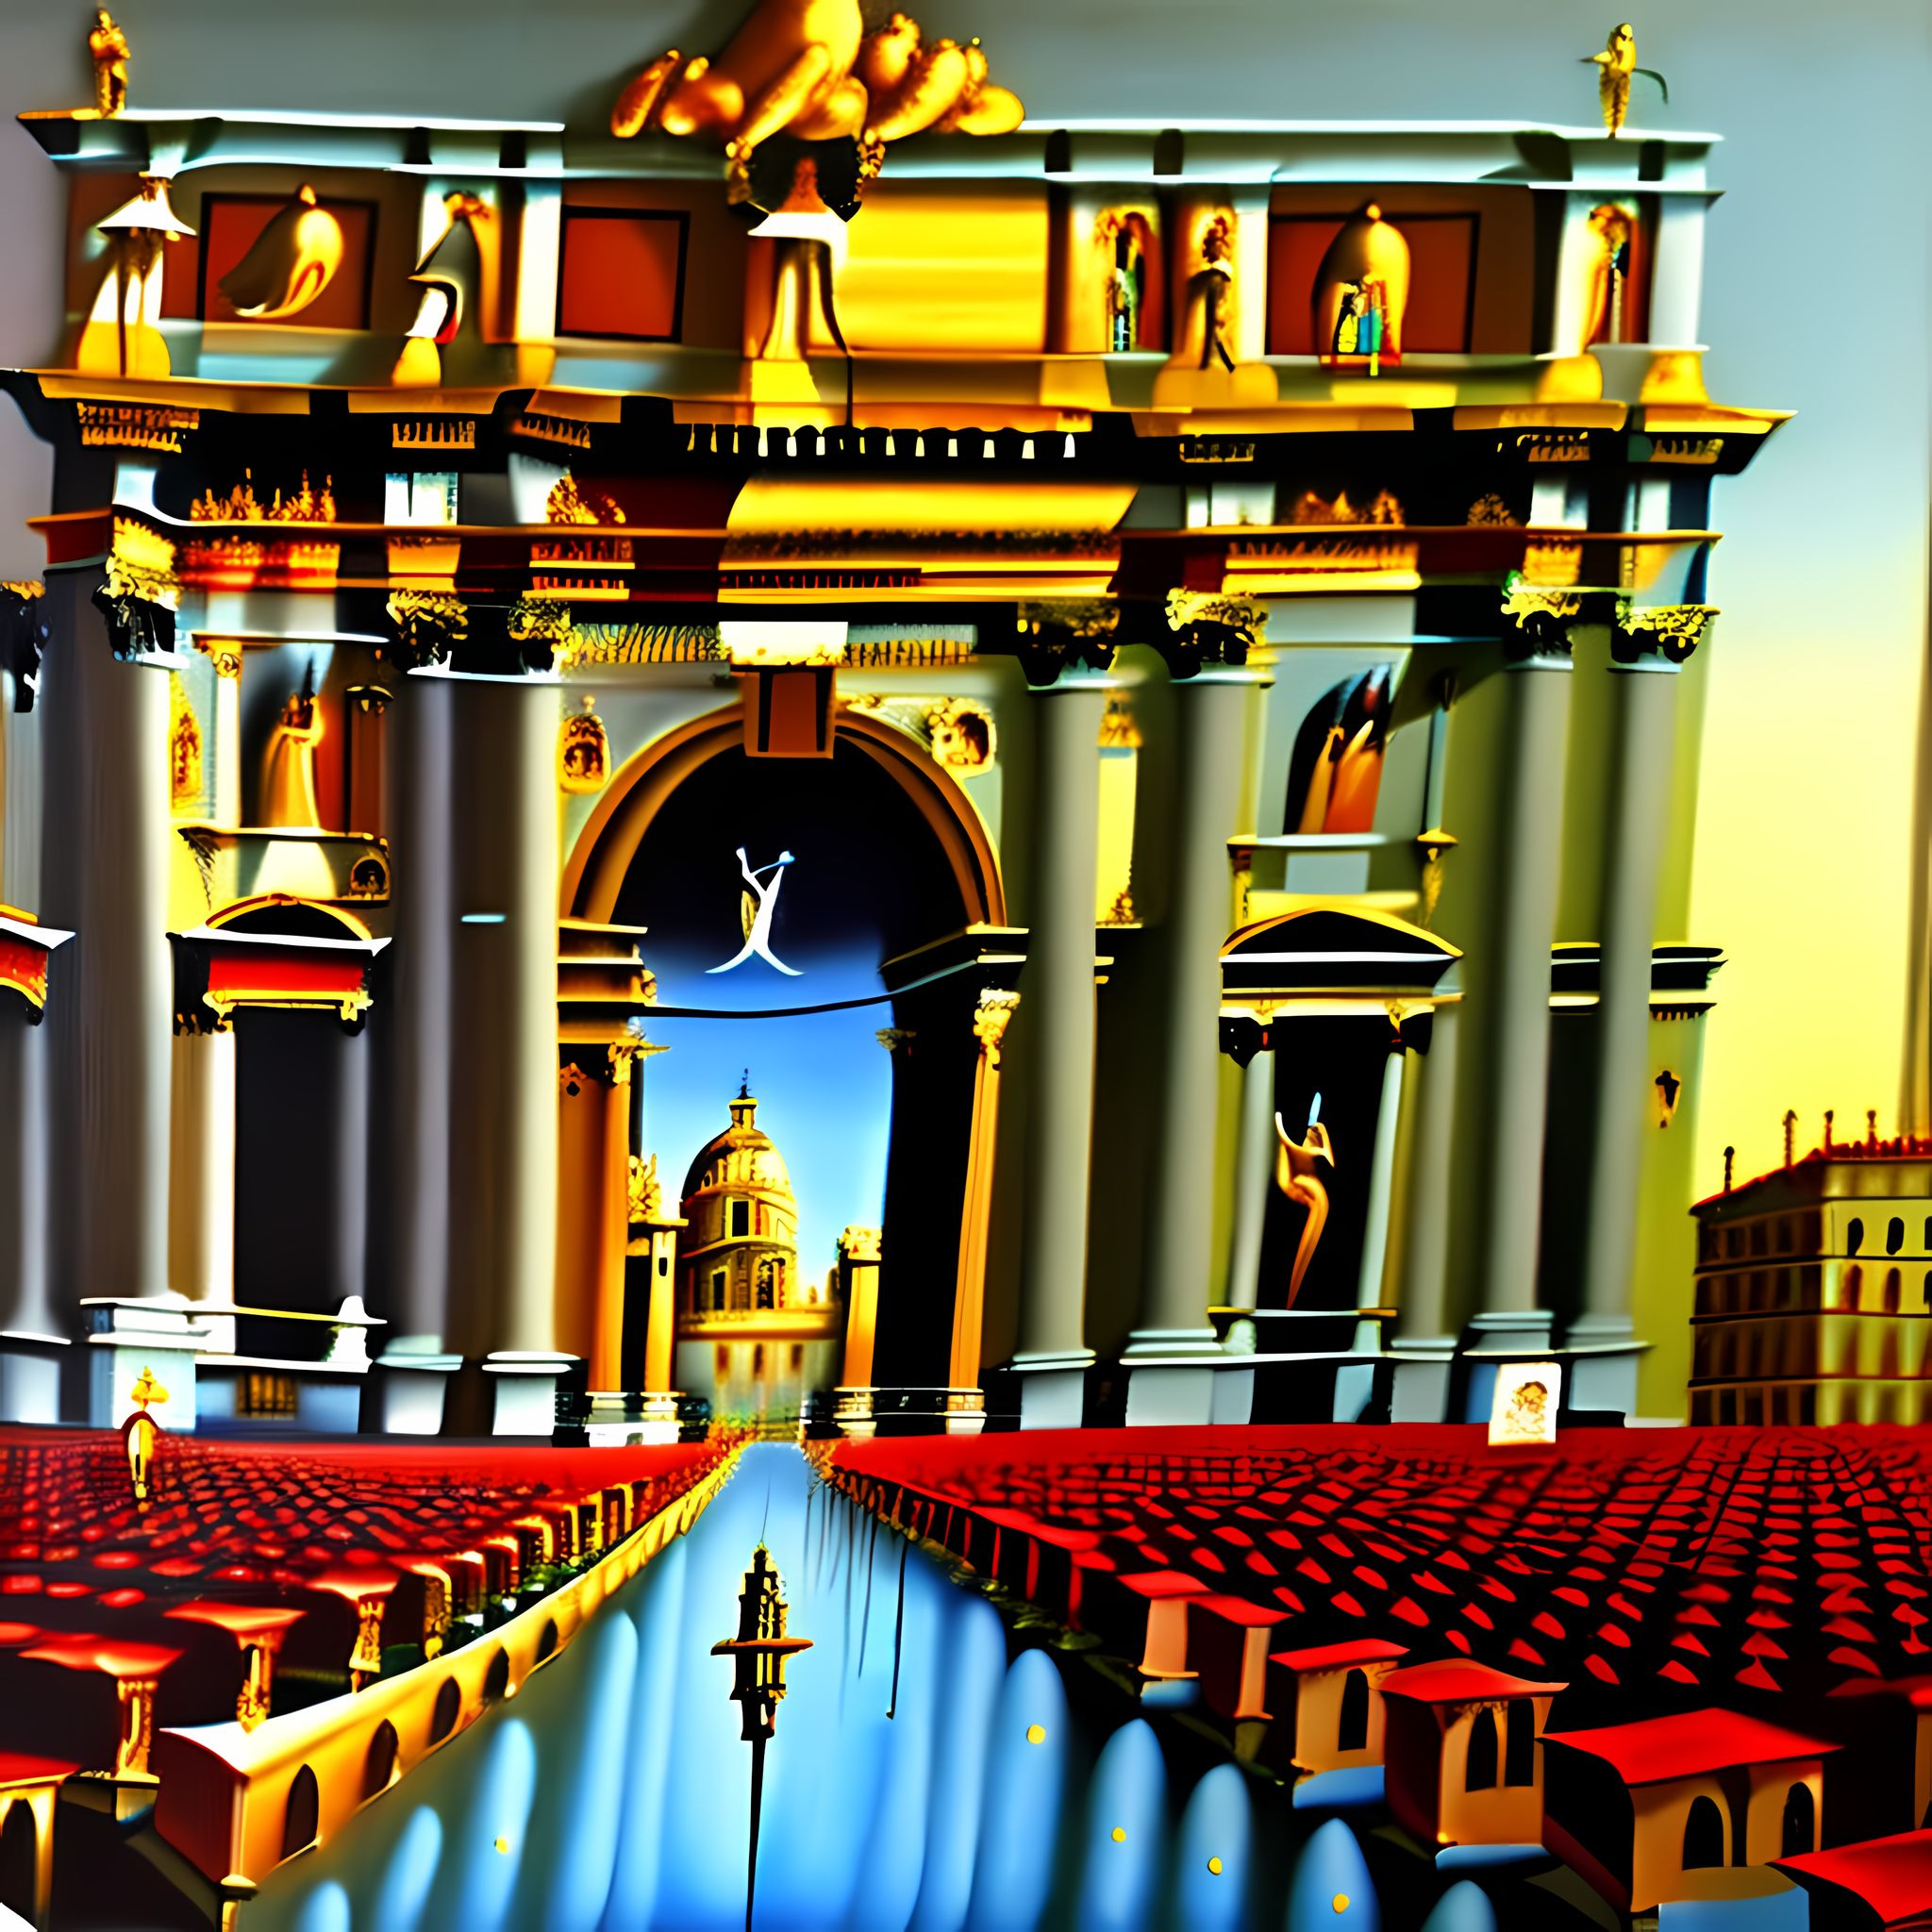 Melting-Rome-Italy-Rome-Cathedral-Historic-Dali-Painting-Surreal-r5dx